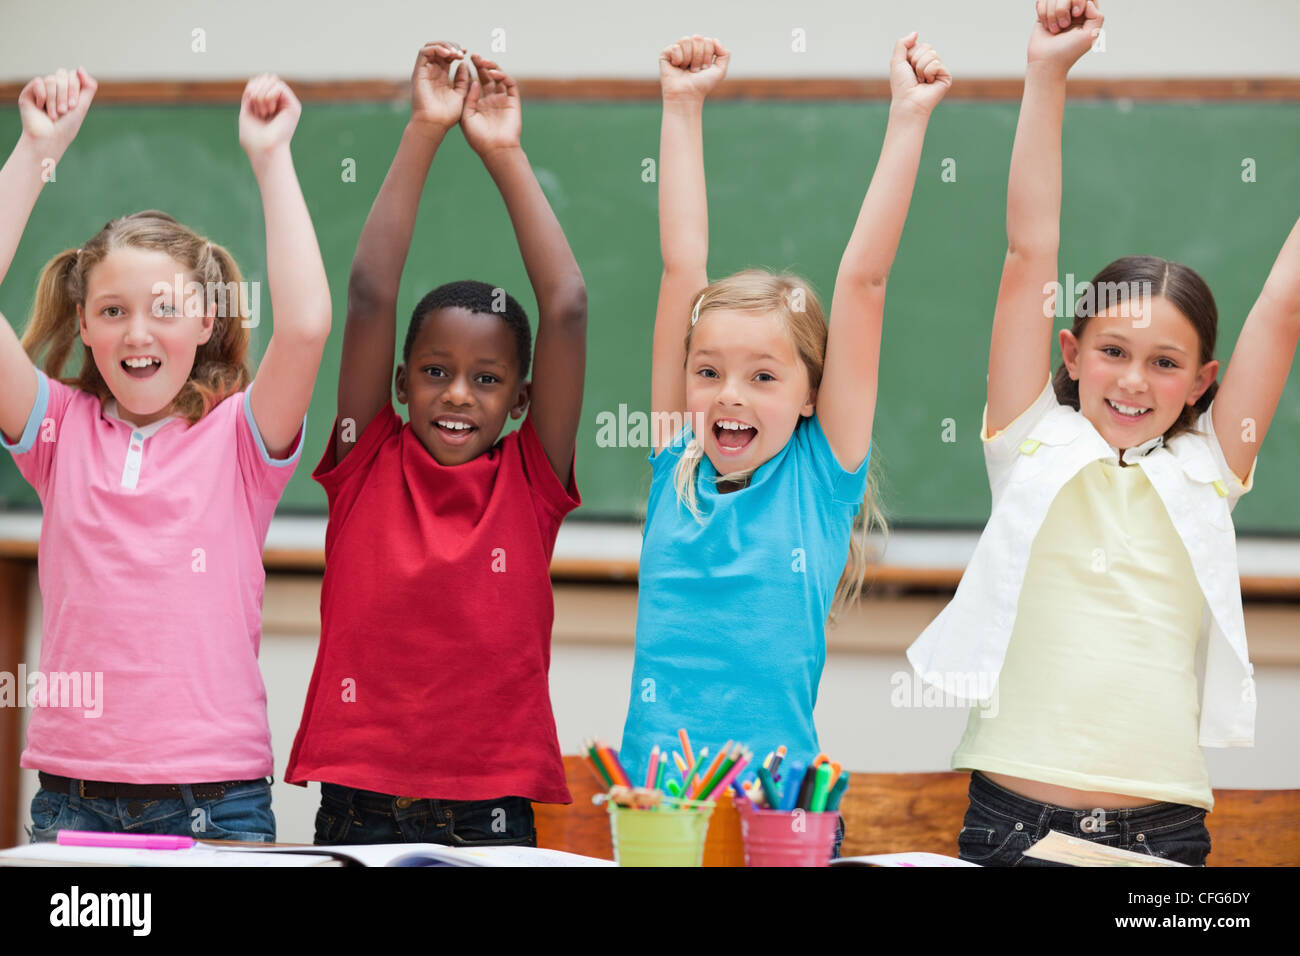 Cheering students standing in classroom Stock Photo